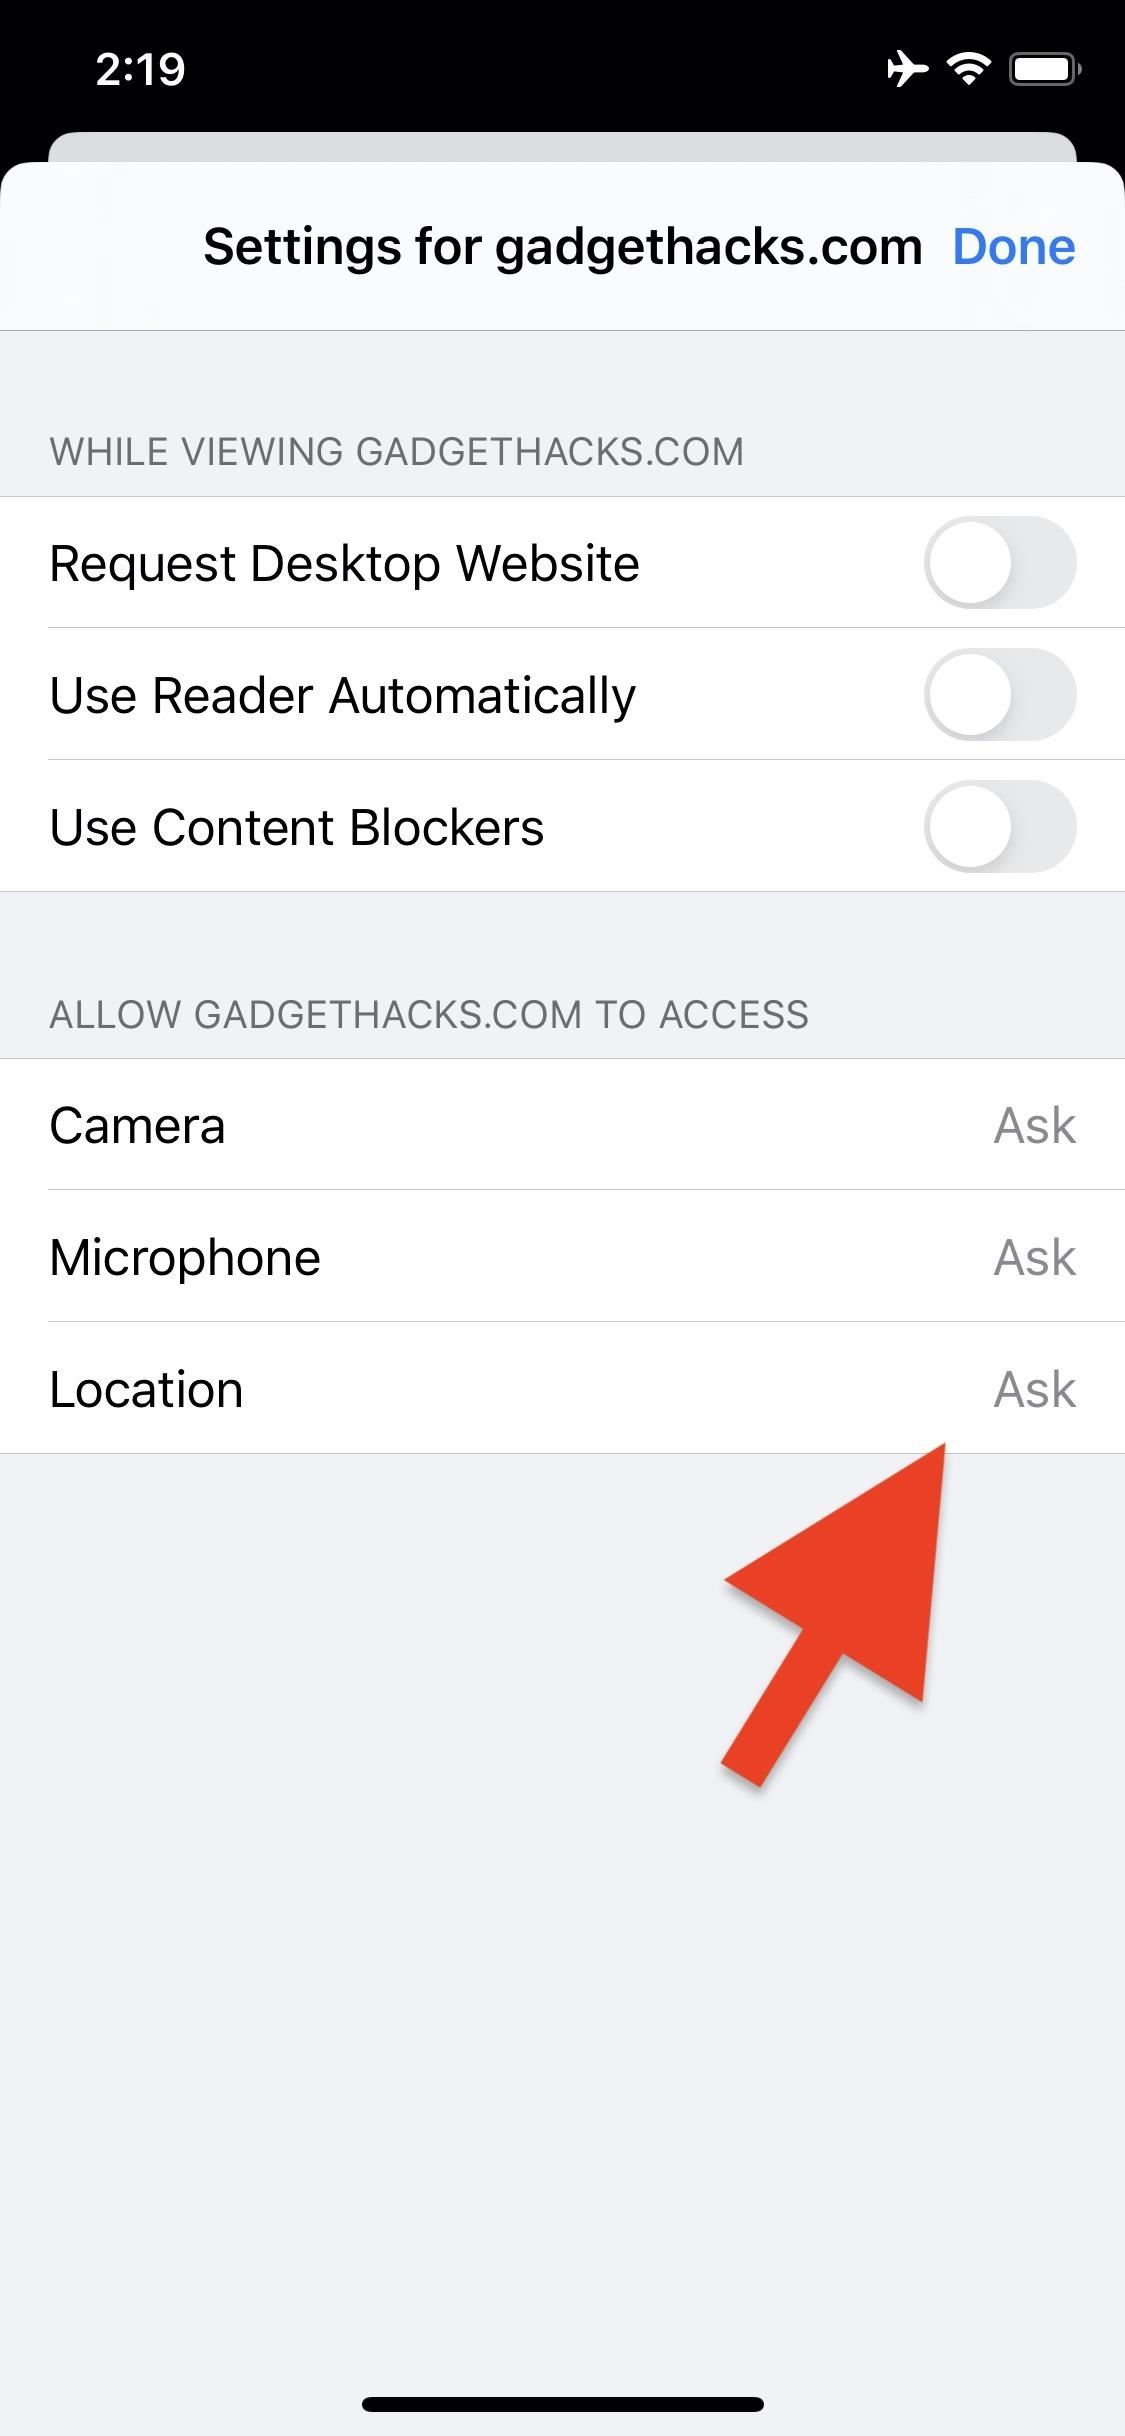 24 Safari Privacy Settings You Need to Check on Your iPhone